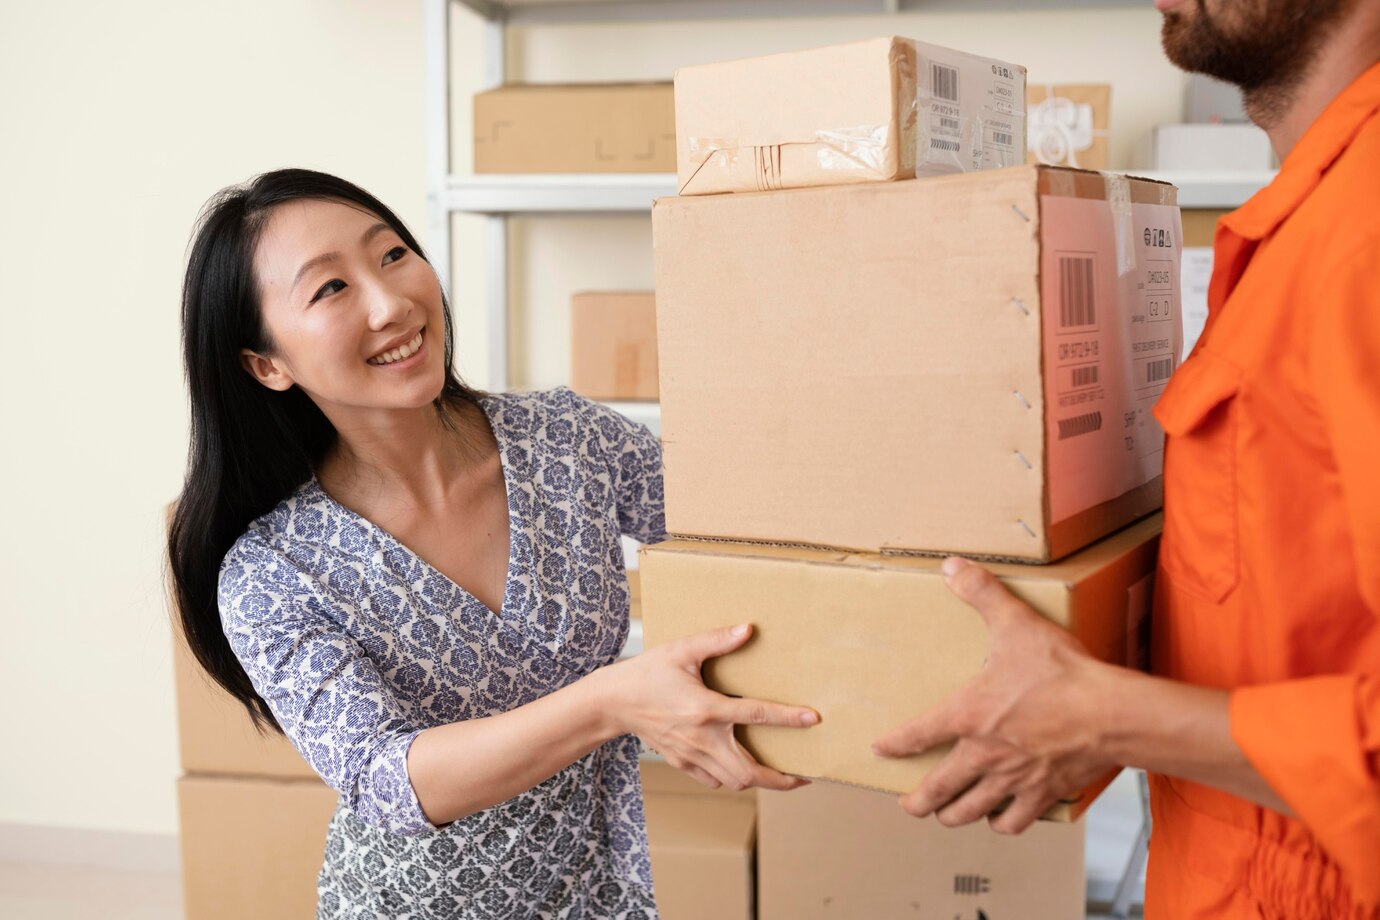 smiling-young-woman-handing-delivery-boxes-courier_23-2148944564